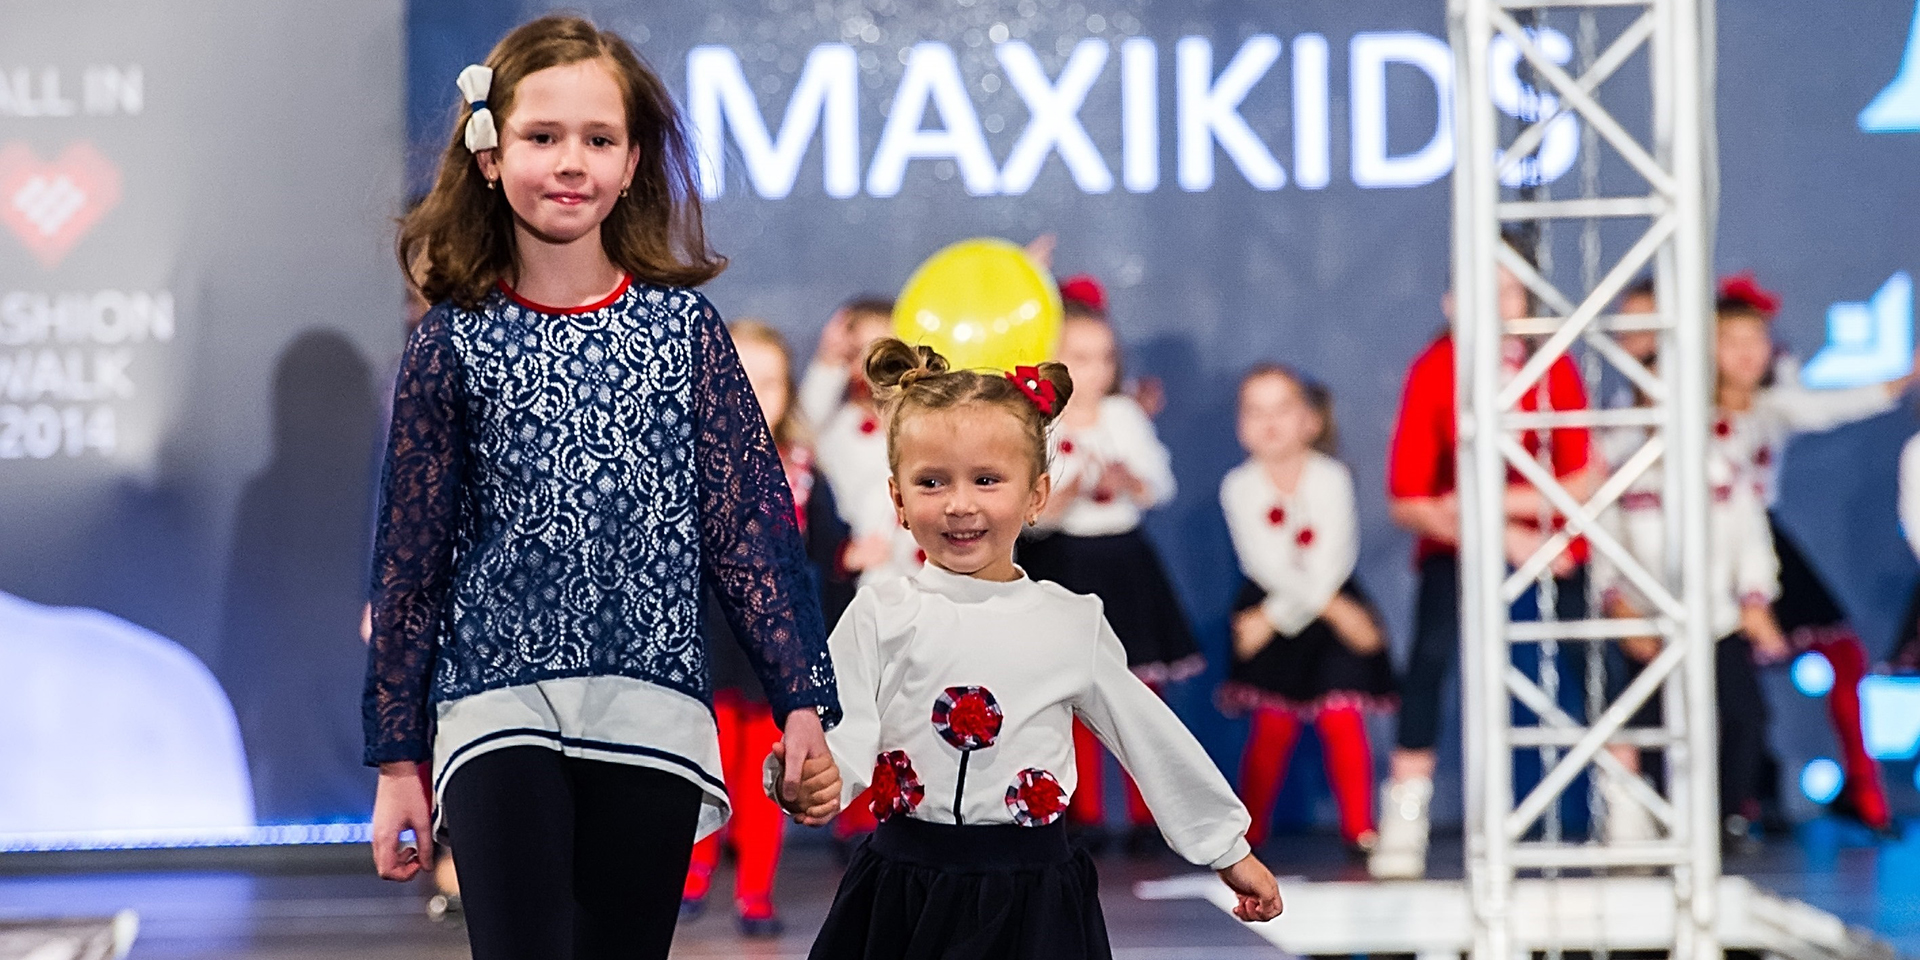 Two young girls smiling, holding hands, and walking down a fashion runway as other young girls wait their turn in the background.